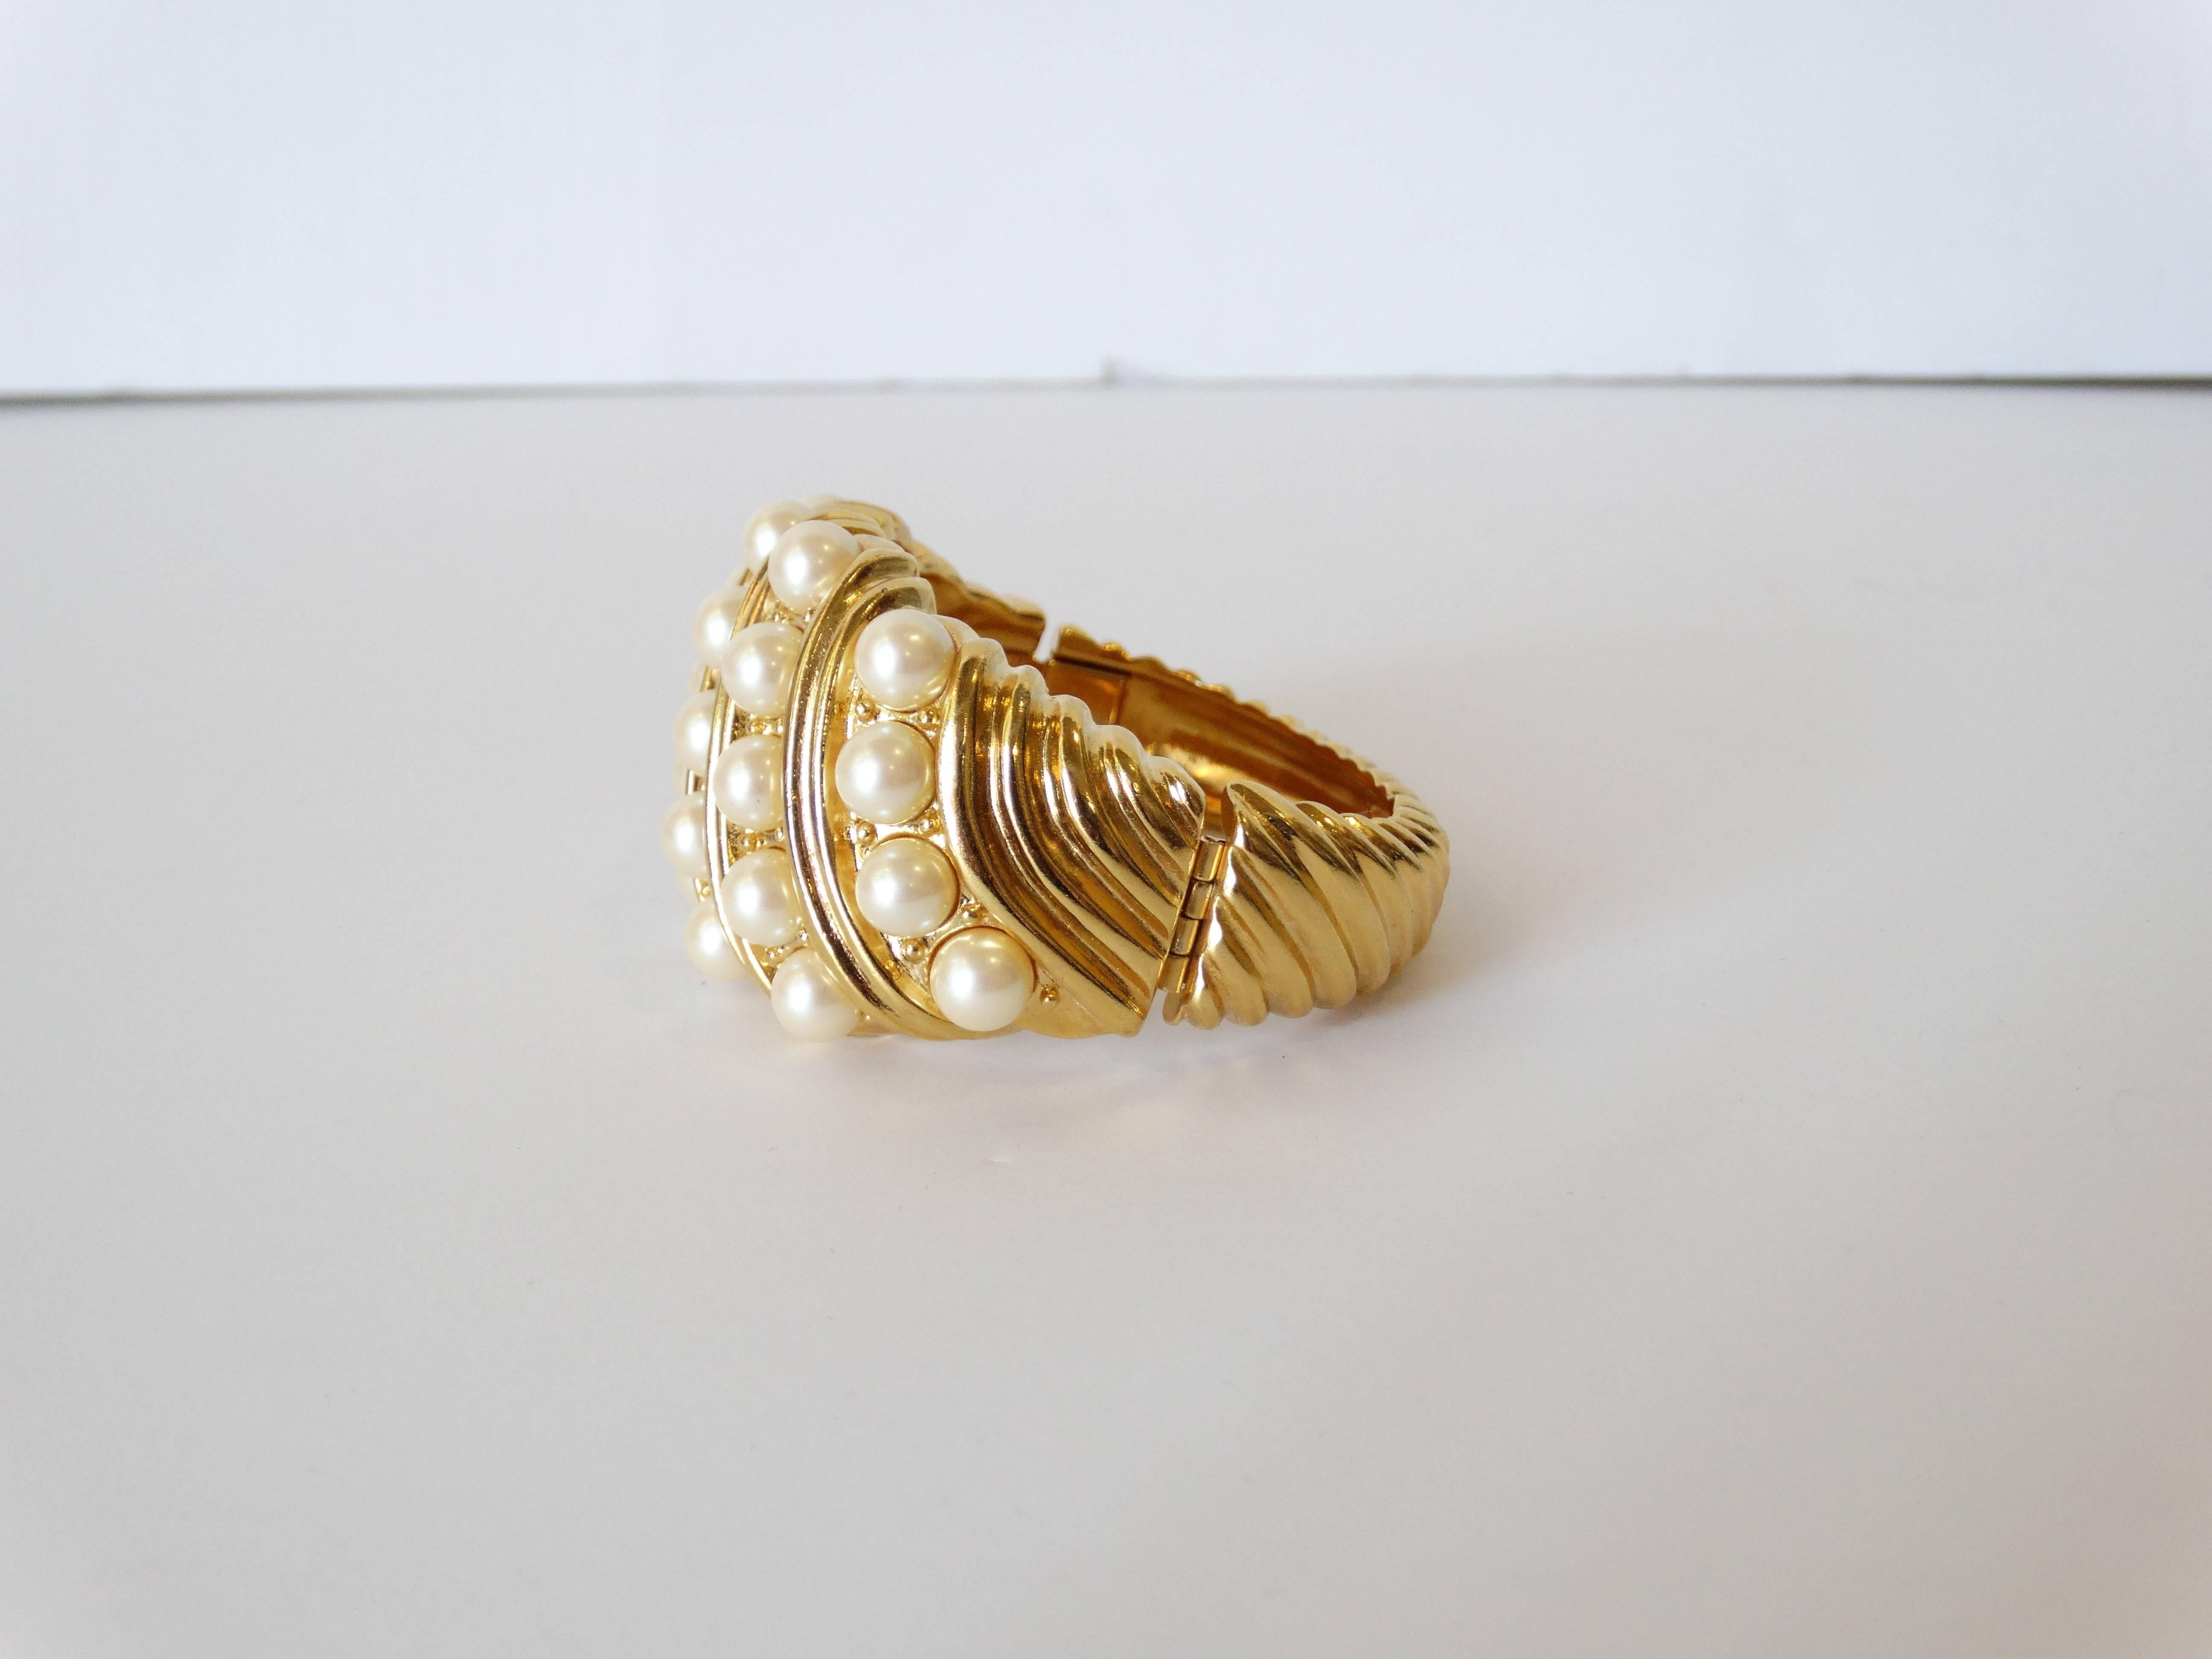 Yves Saint Laurent cuff cast in a brilliant gold metal. Banded with 5 rows of faux pearl accents. Box clasp closure on the side. Signed at the back YSL